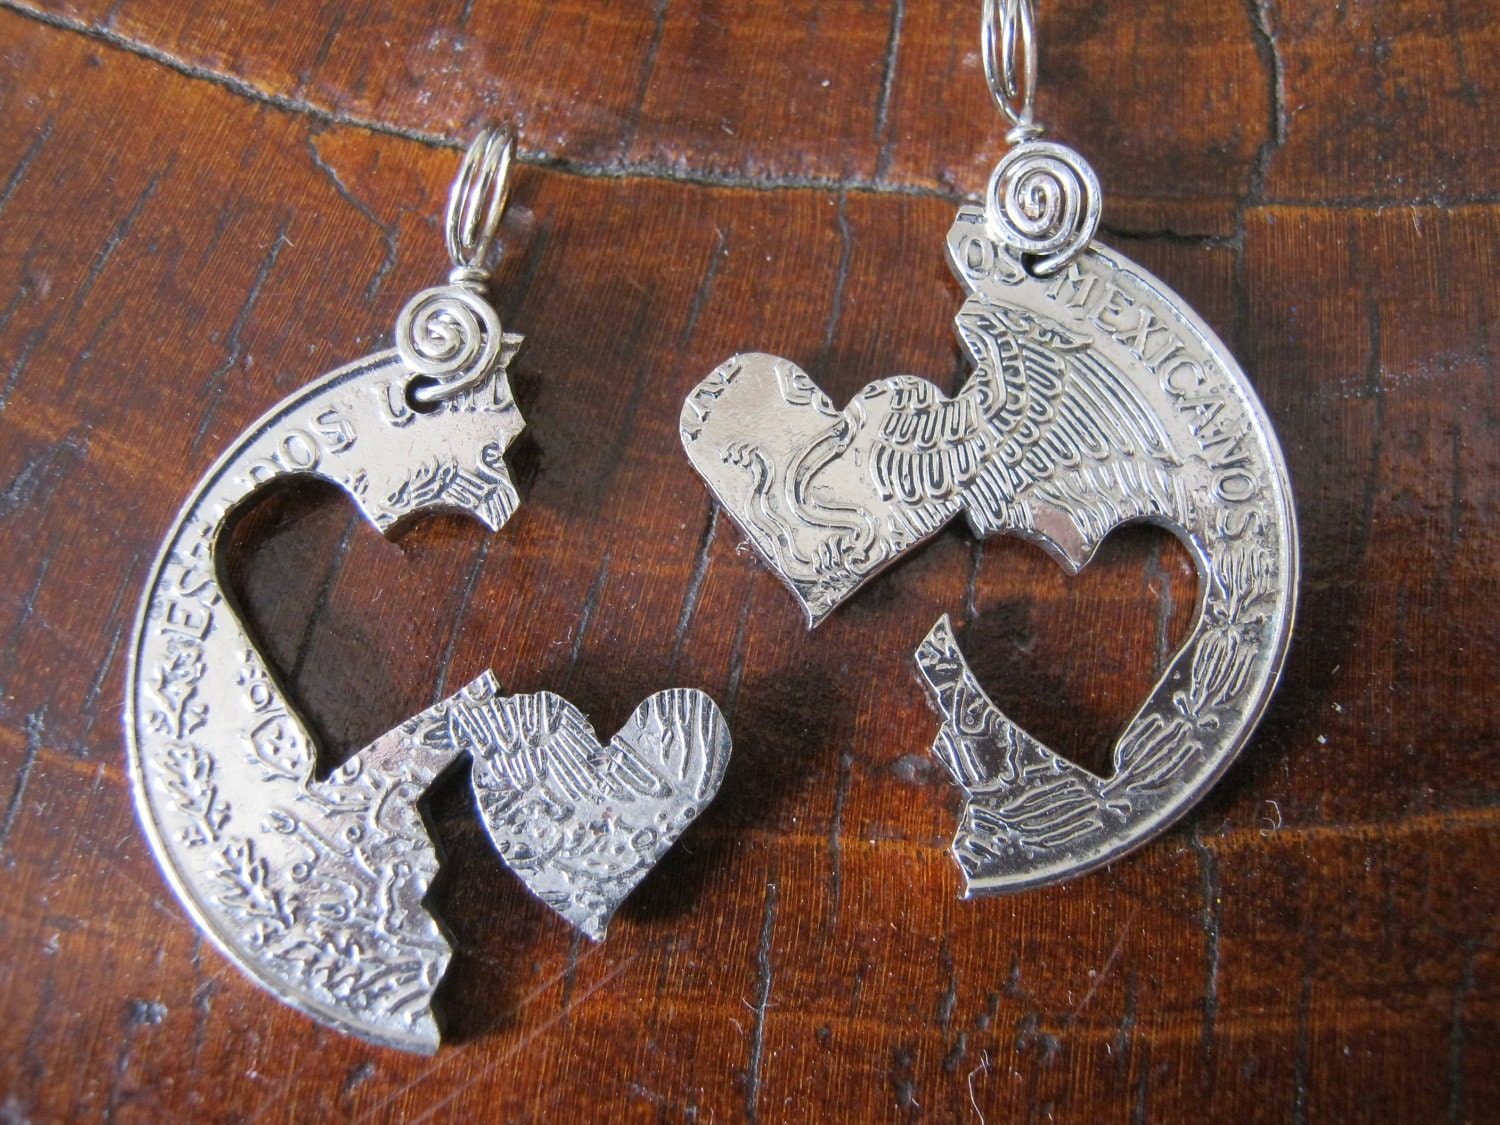 Two Hearts Friendship necklace made with a silver coin - EdieBaron